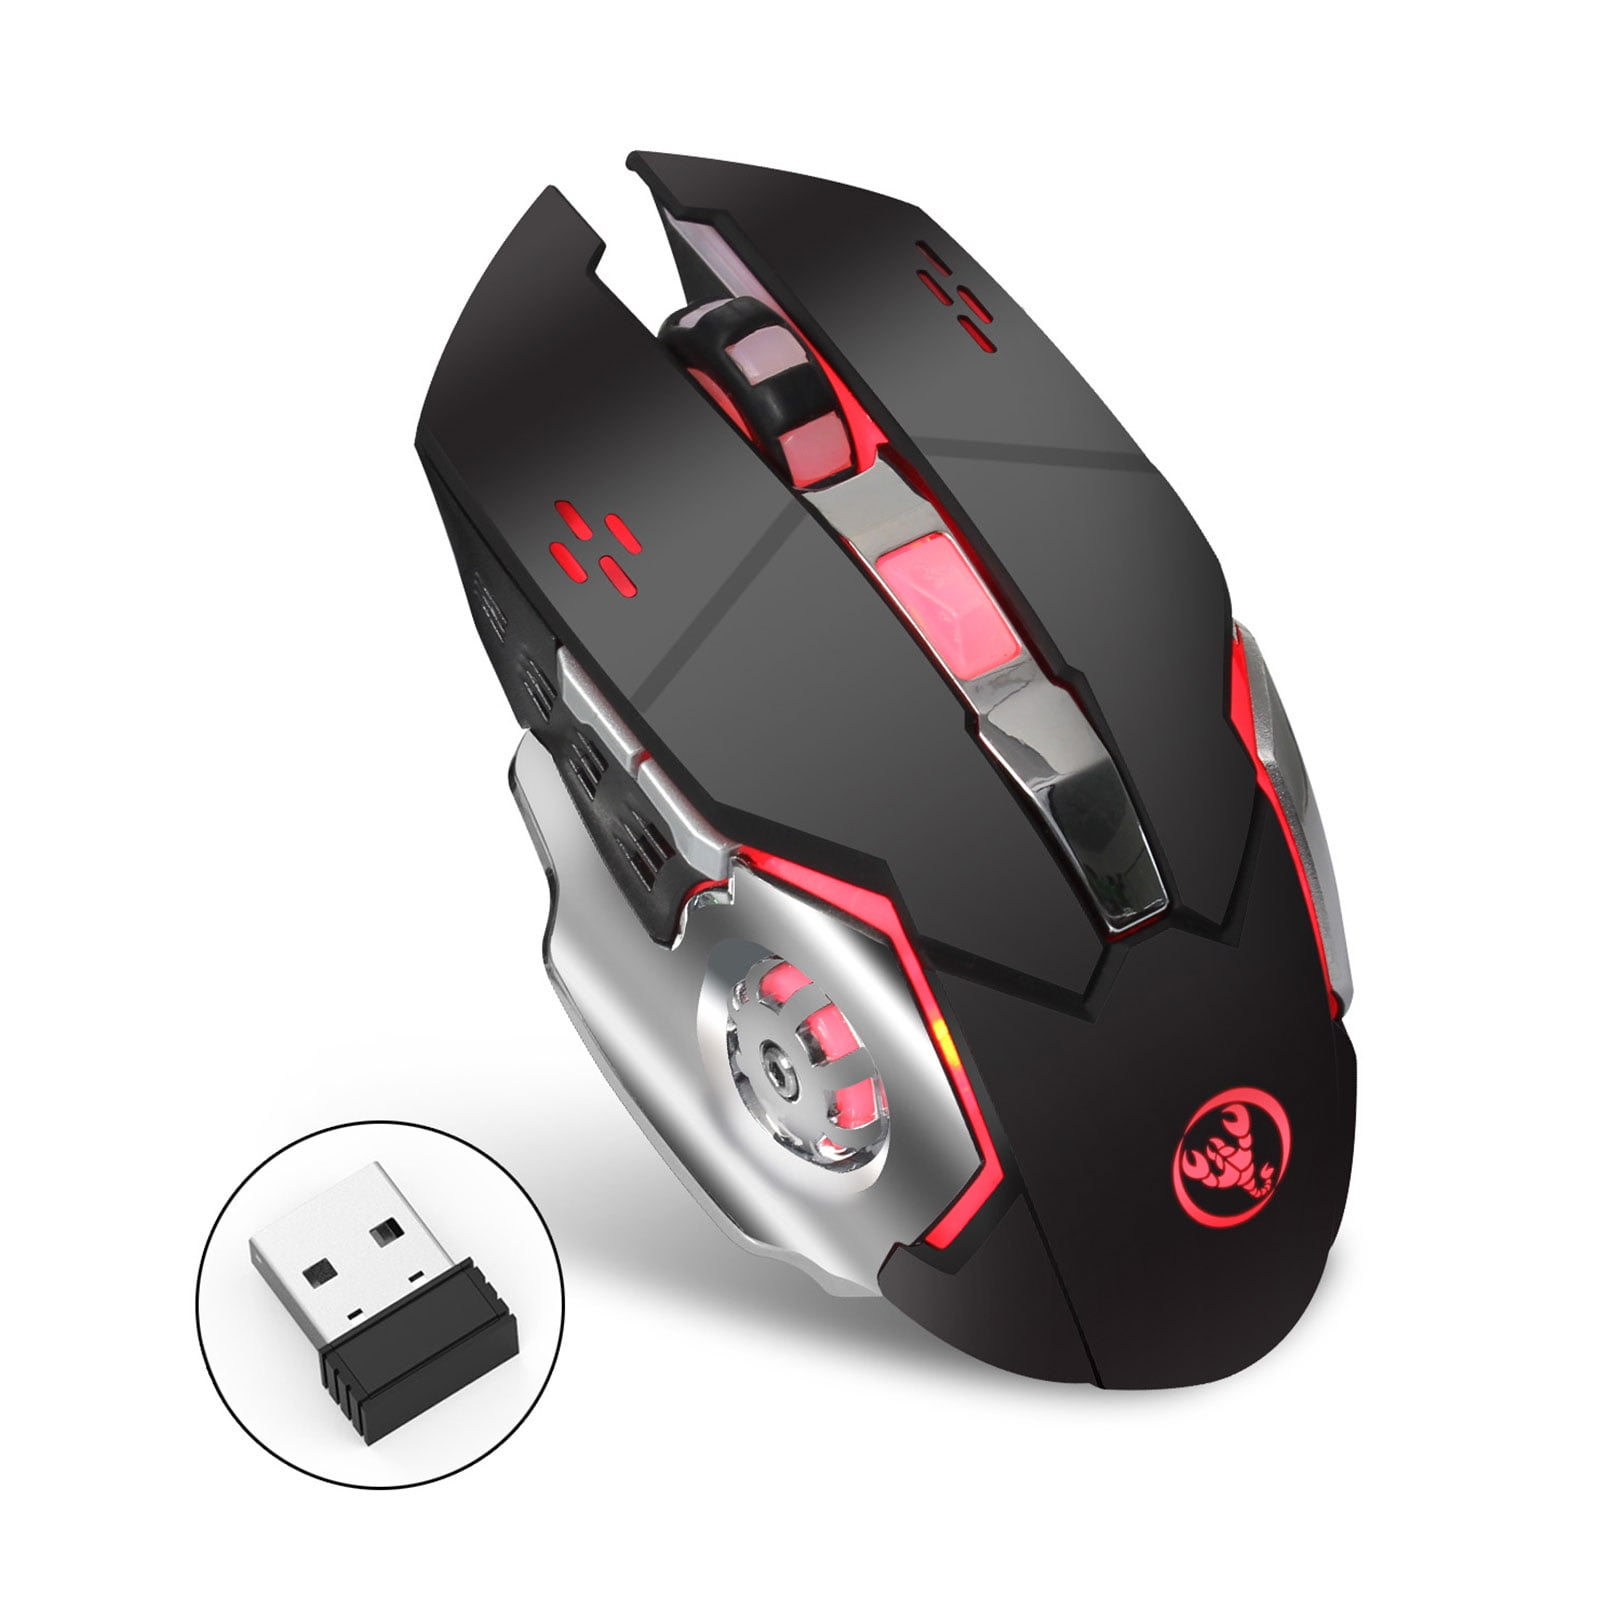 X70 7 LED Backlit Rechargeable 2.4GHz Wireless USB Optical Gaming Mouse Mice US 